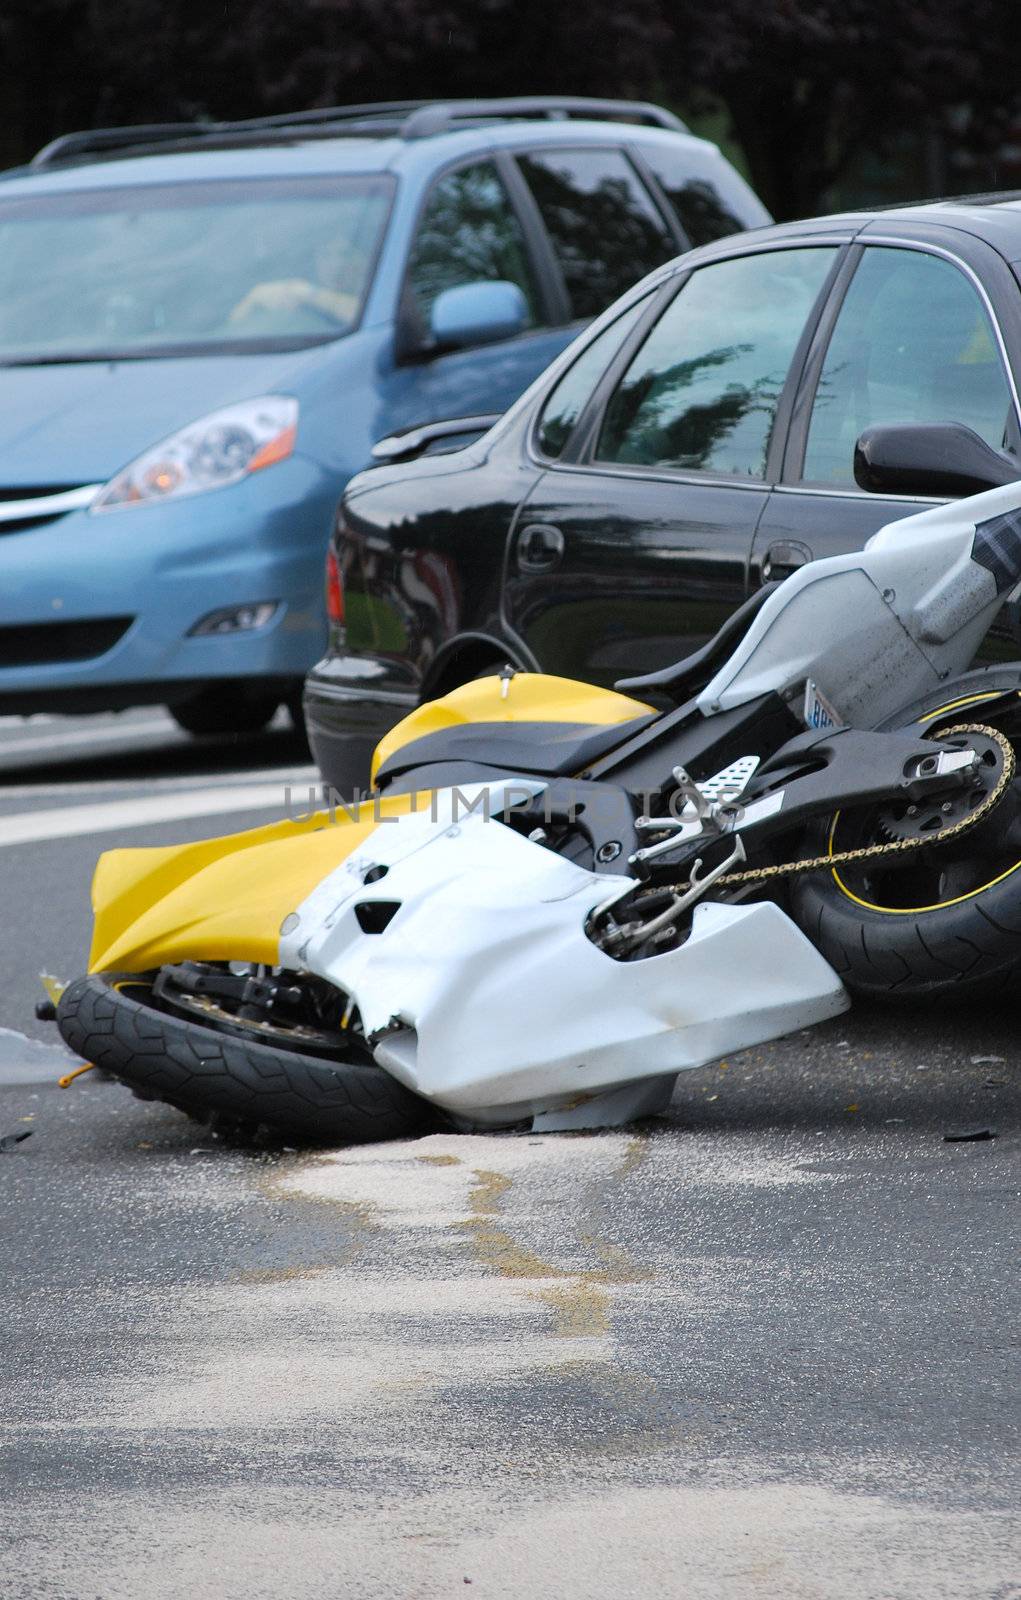 Motorcycle accident on a public street.